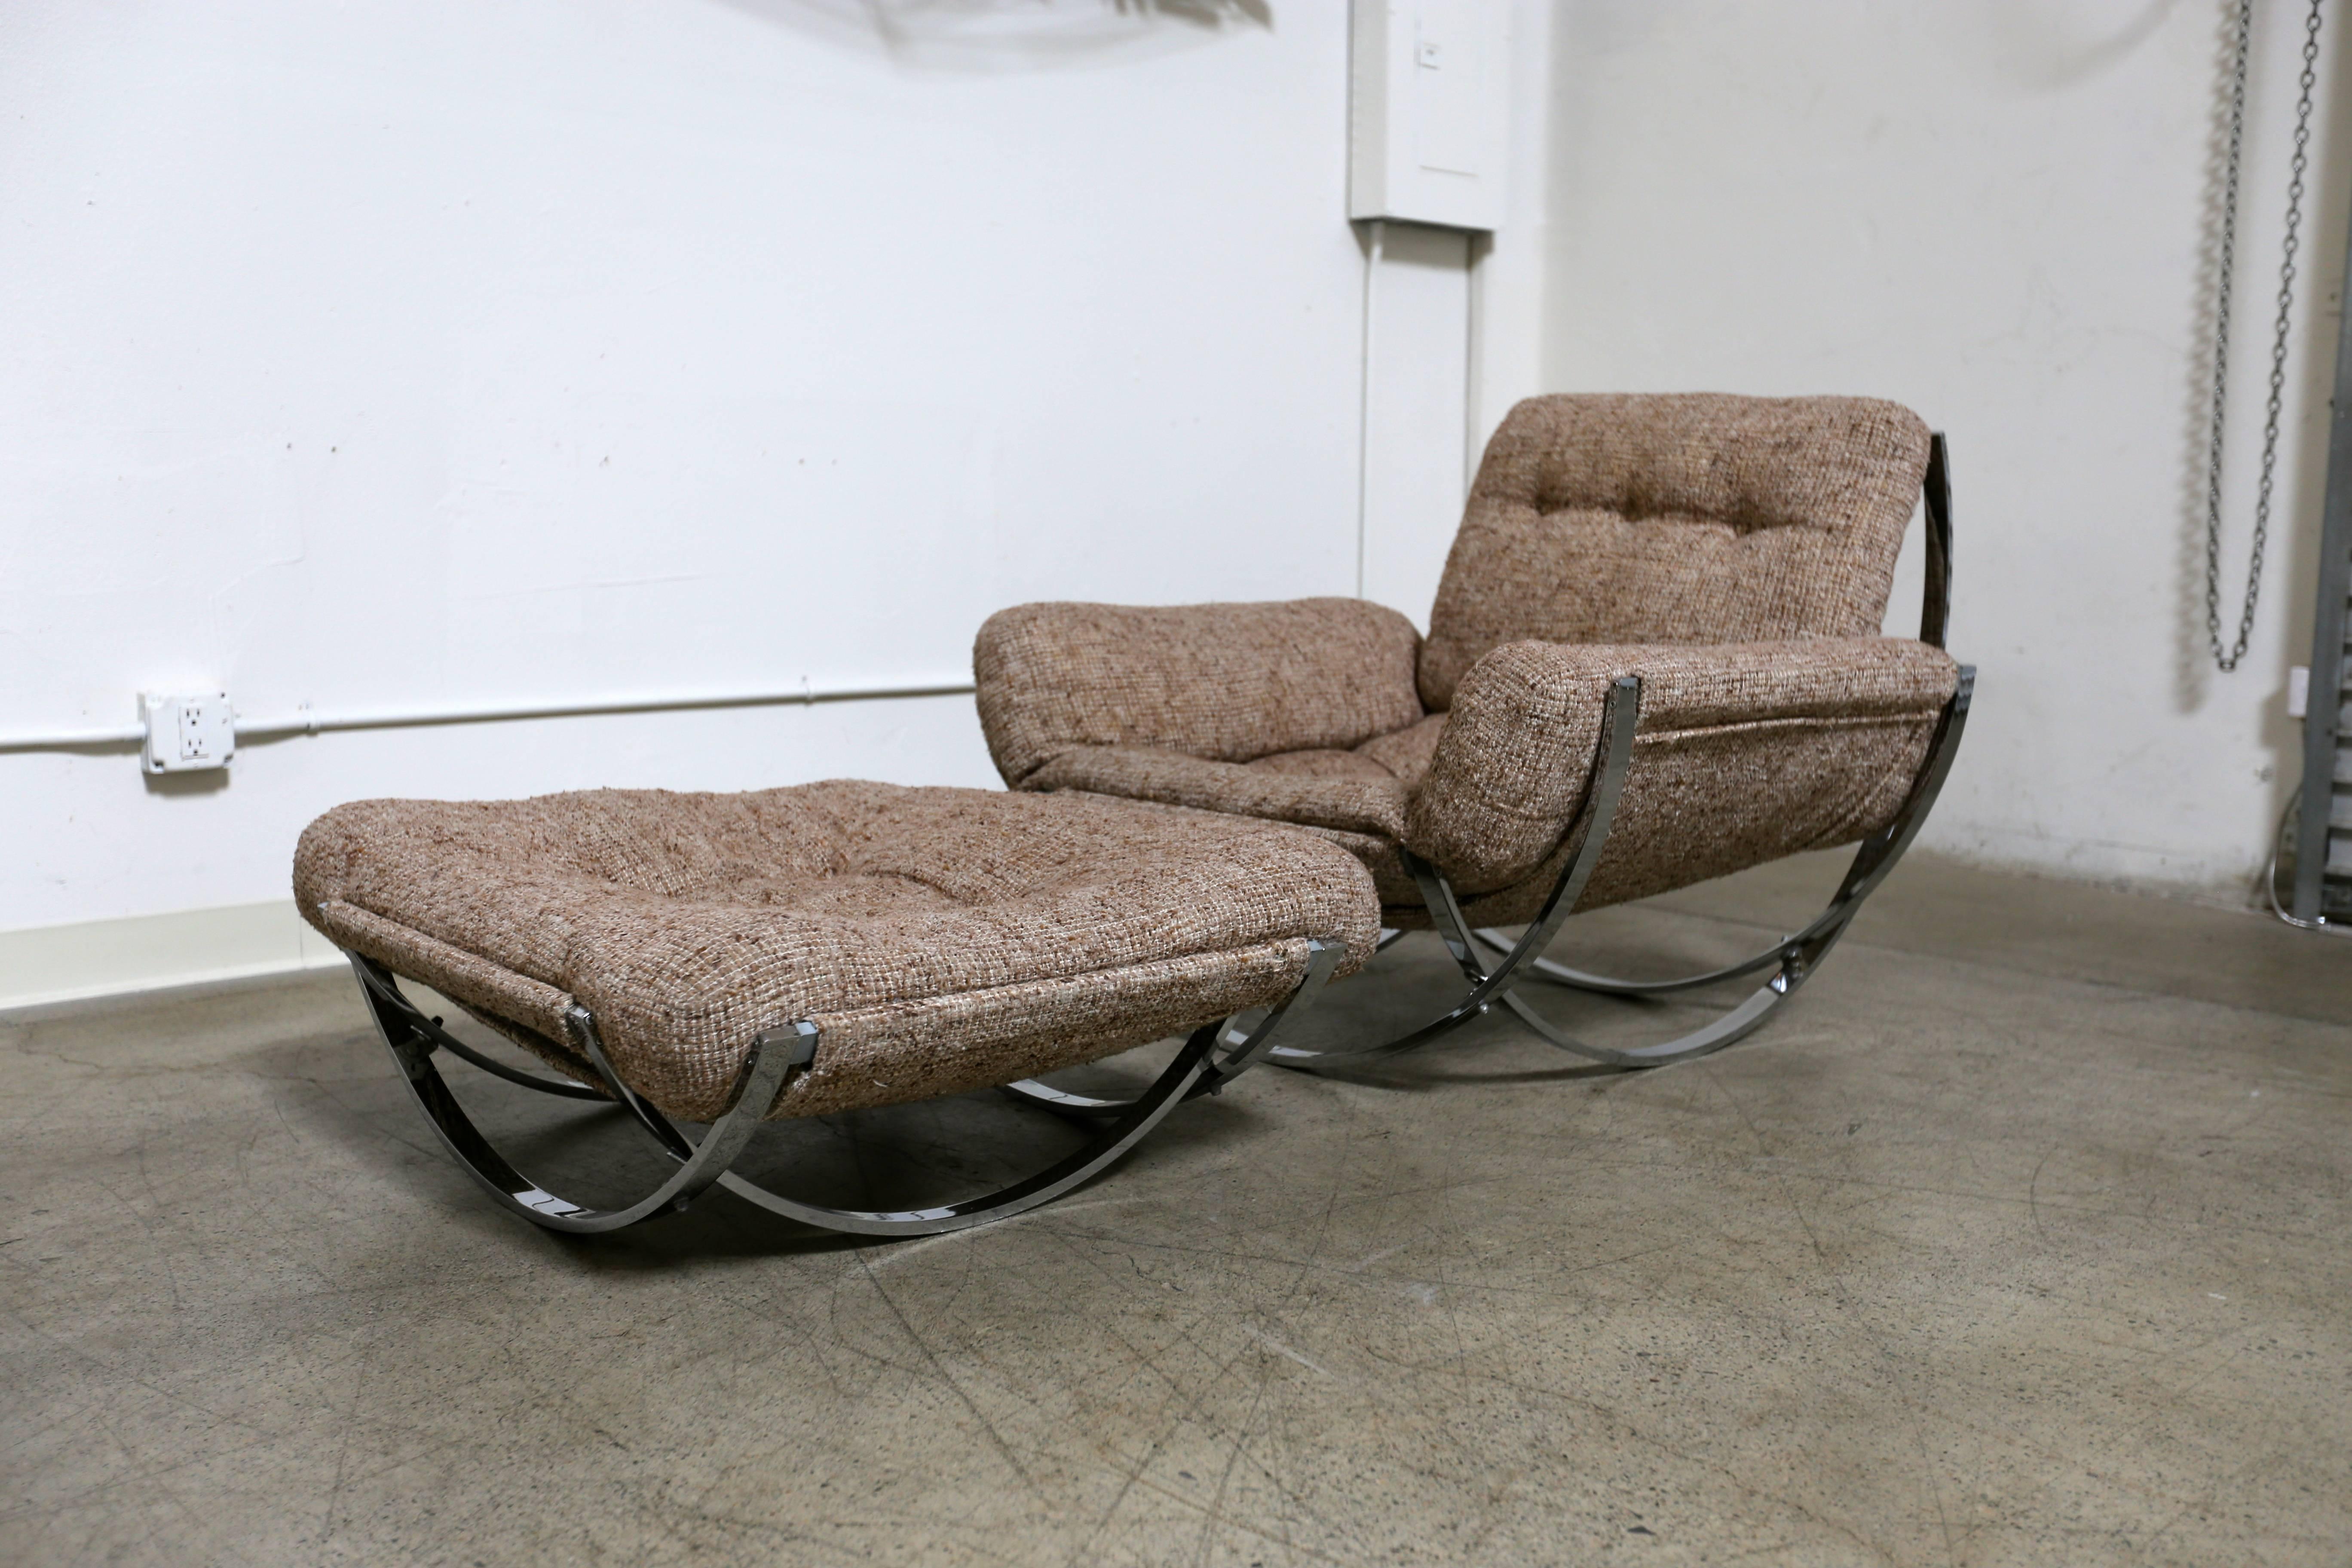 Sculptural lounge chair and ottoman. 

The chair measures: 41